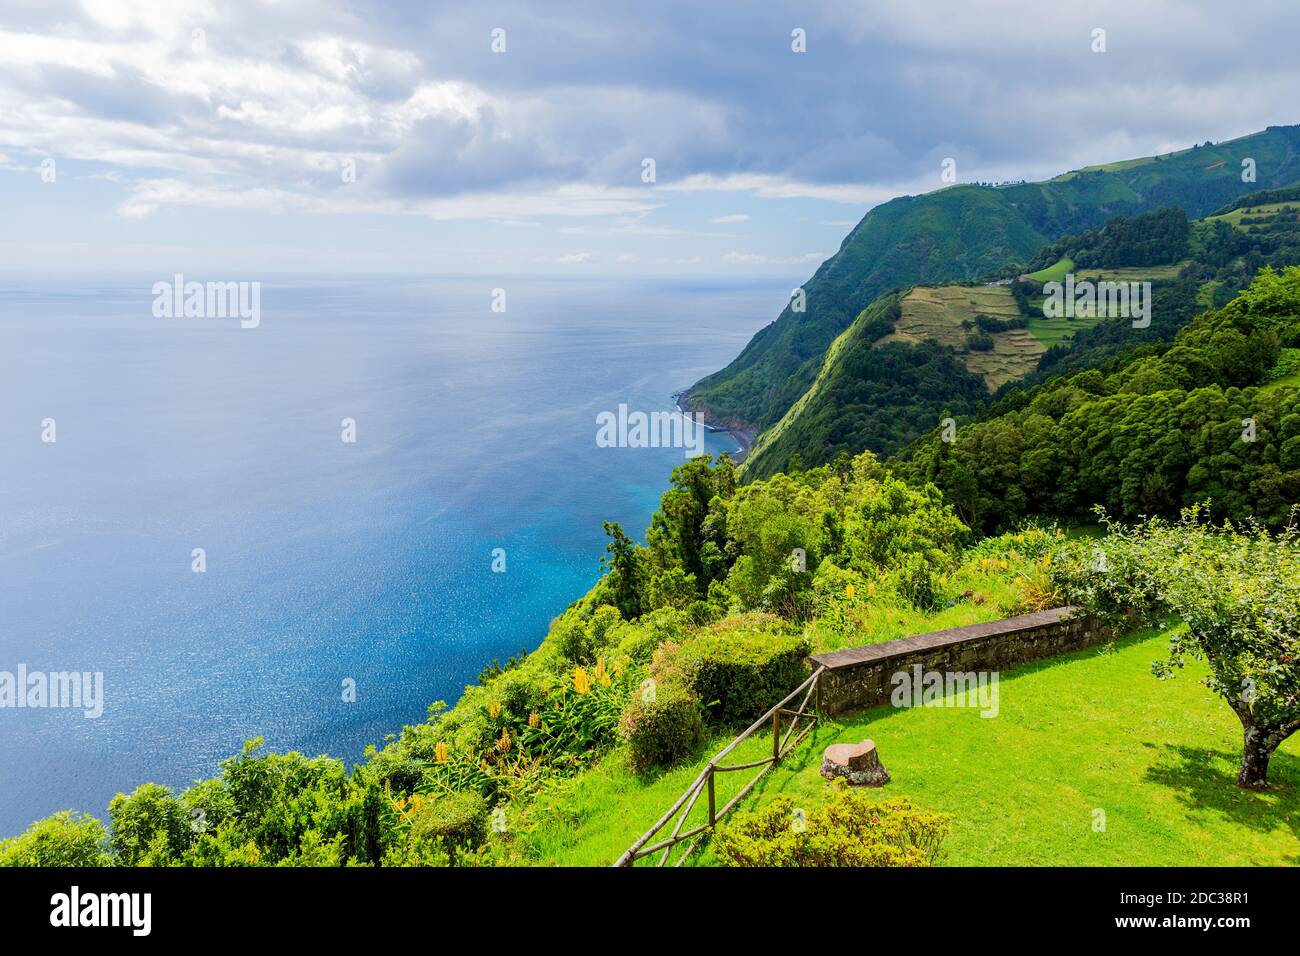 Northeast of the island of Sao Miguel in the Azores. Viewpoint of Ponta do Sossego. Amazingly point of interest in a major destination of Portugal. Stock Photo